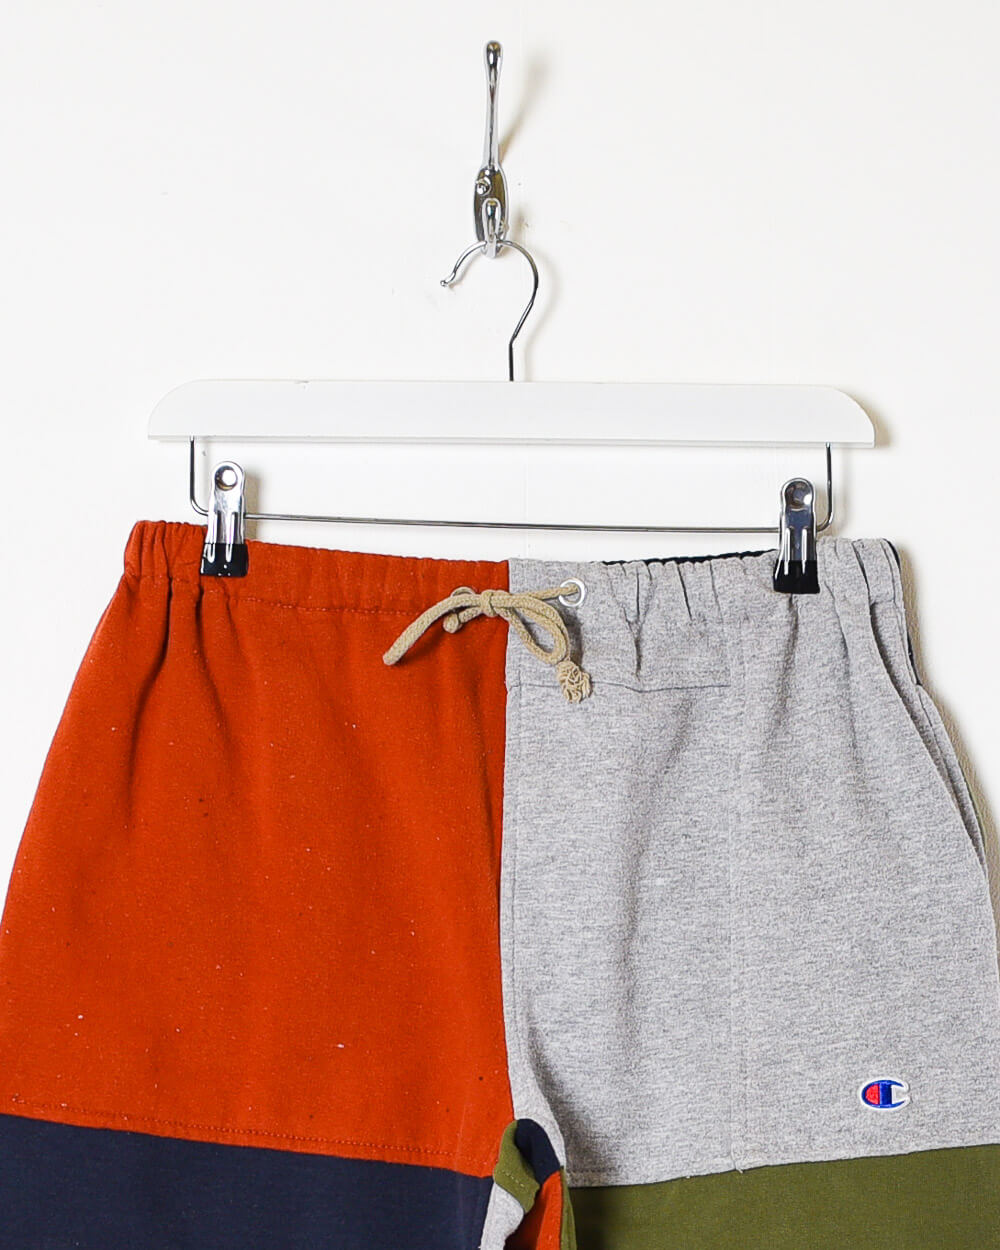 Multi Champion Reworked Shorts - Small